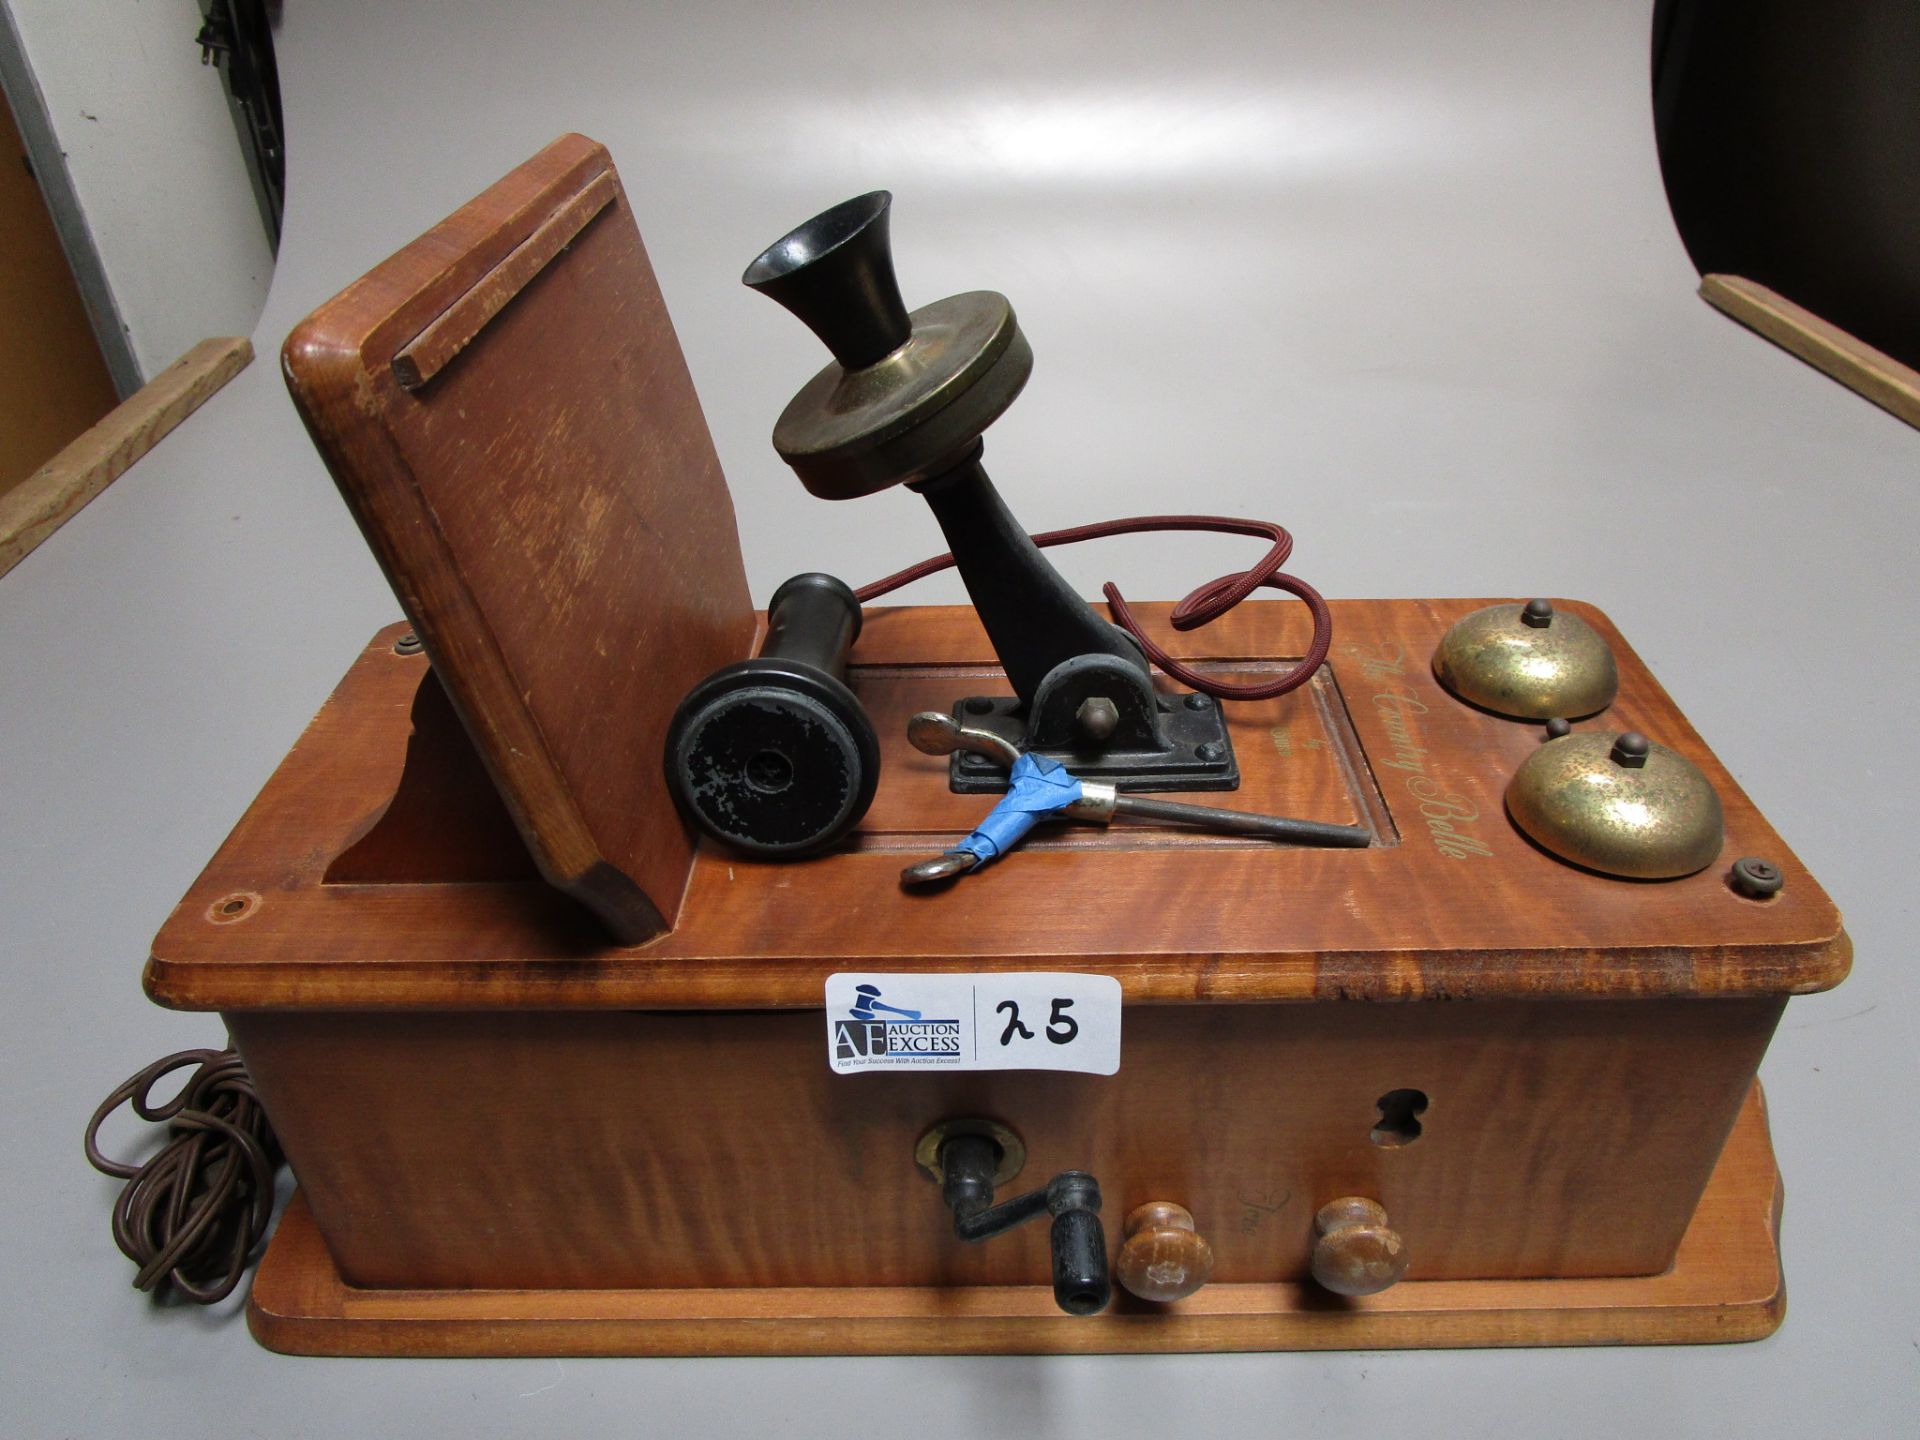 GUILD COUNTRY BELL TELEPHONE